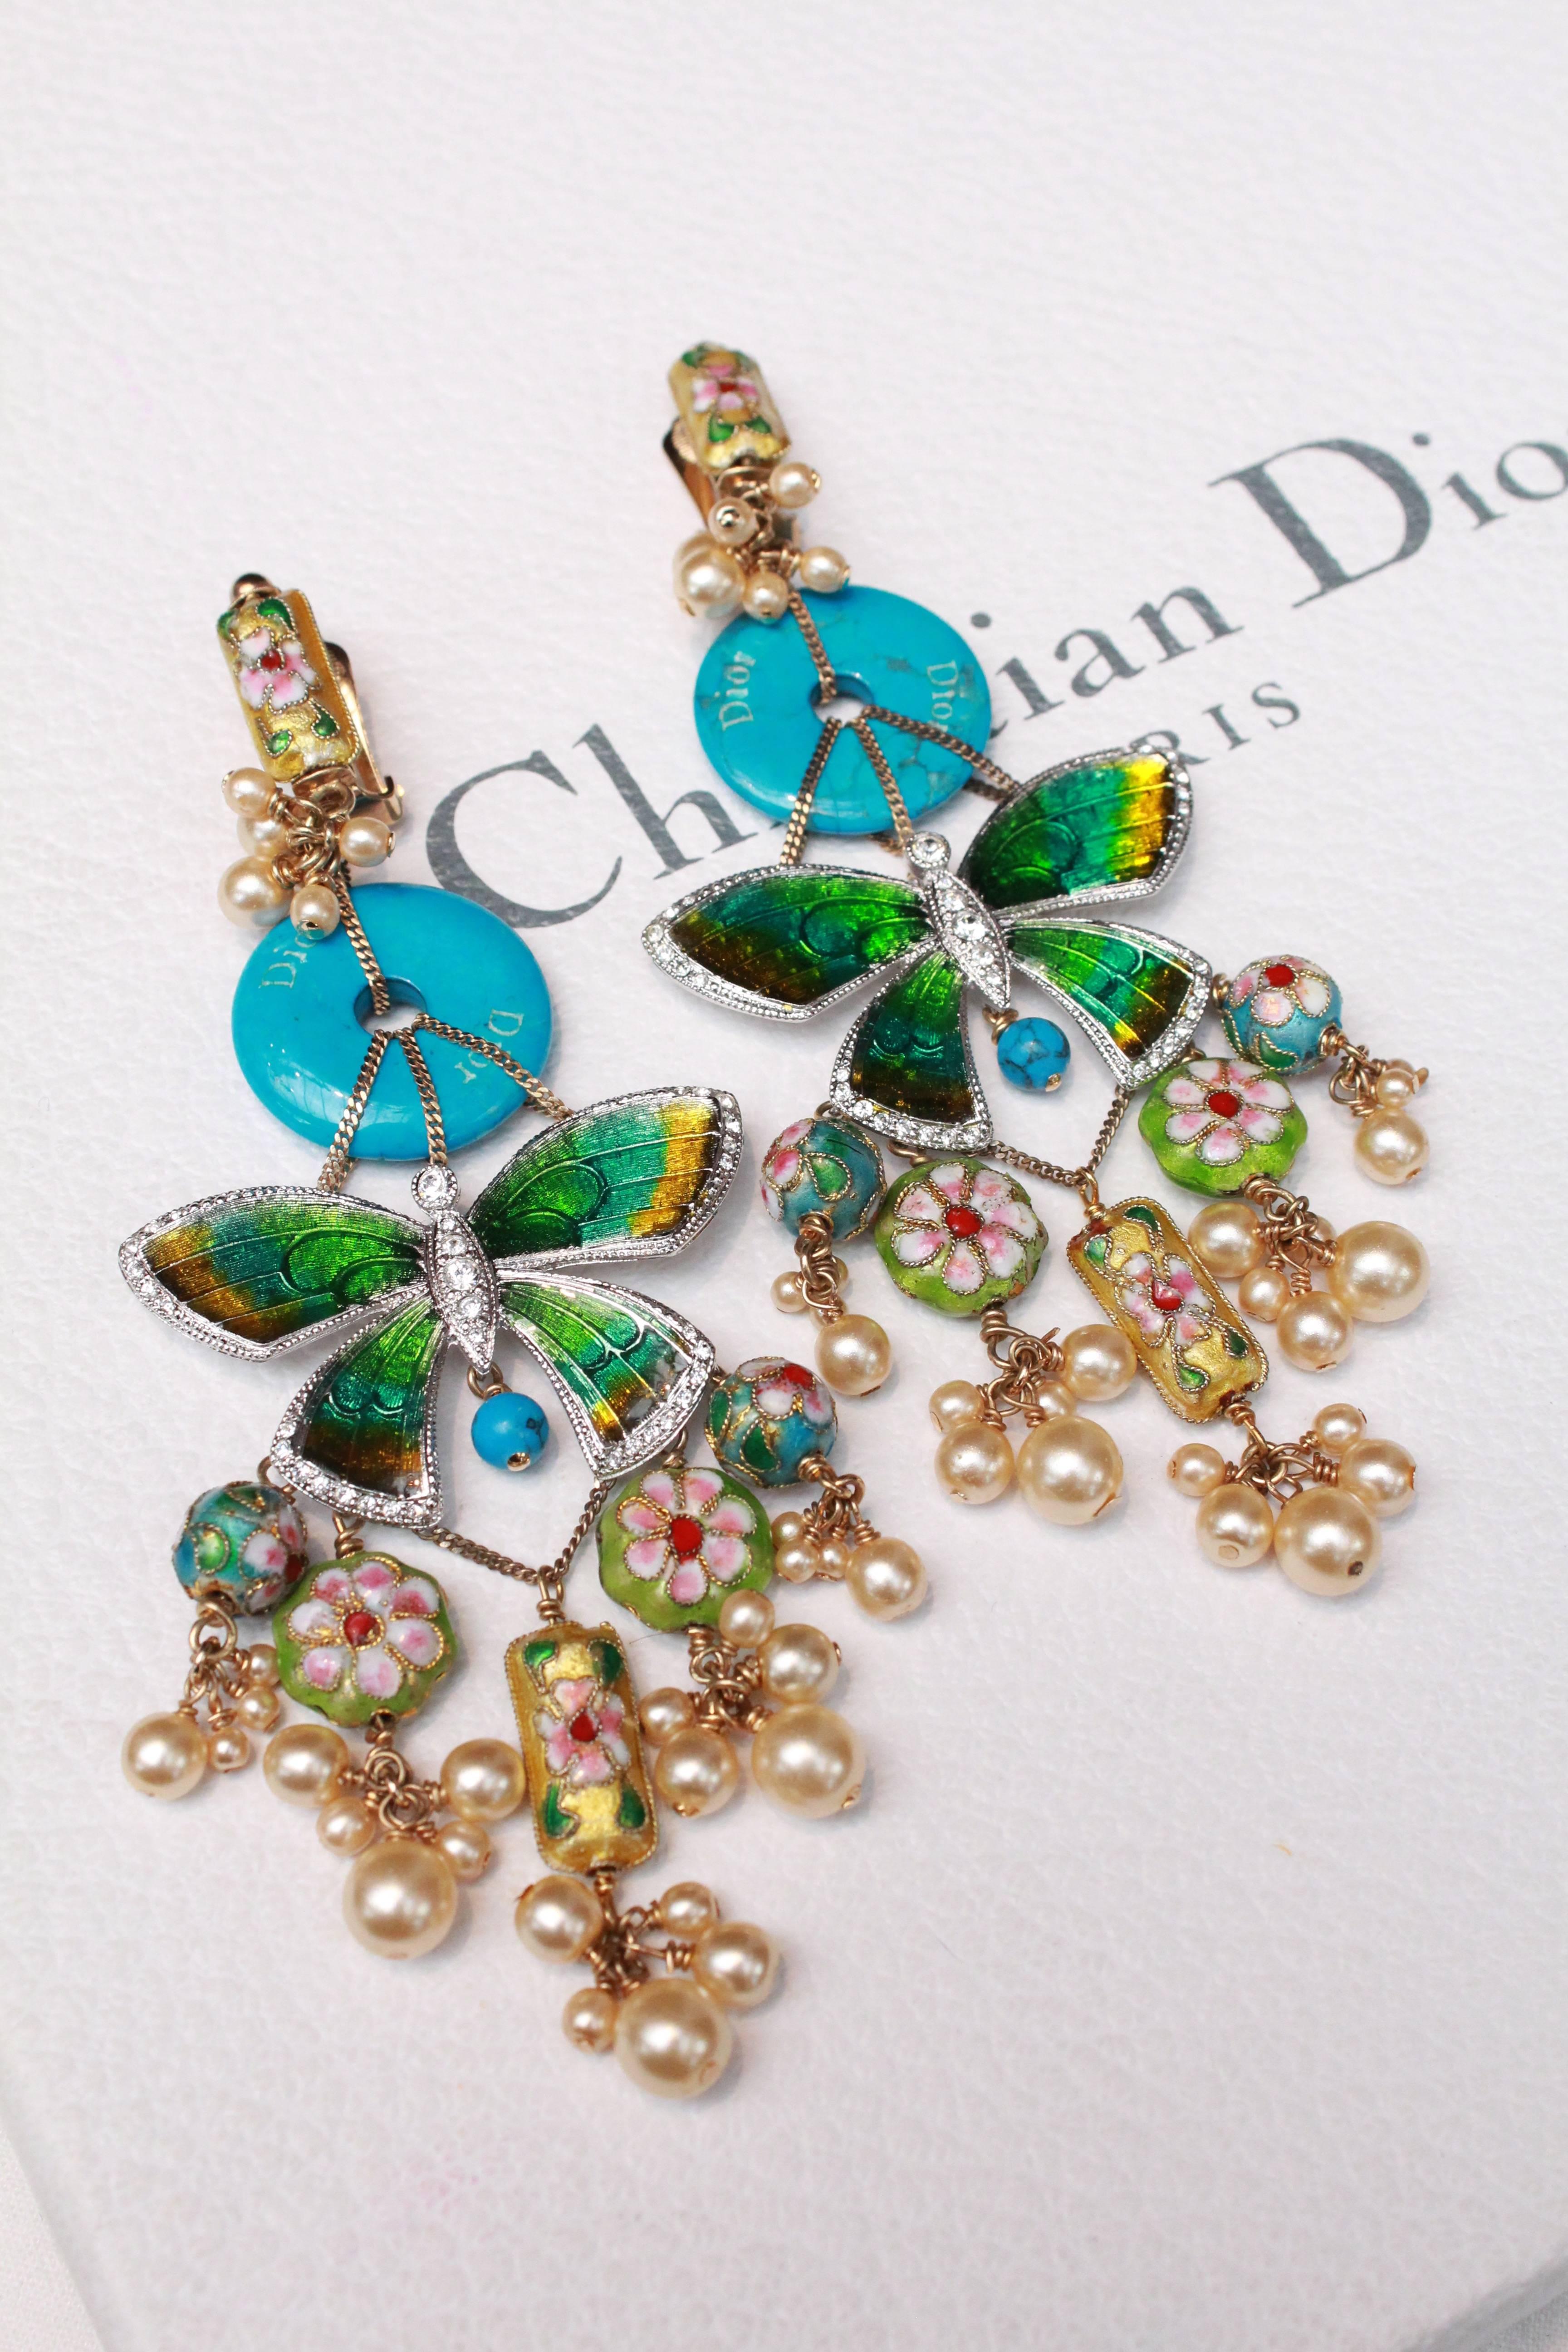 CHRISTIAN DIOR par John Galliano (Made in France) Pair of Asian-inspired drop clip-on earrings. The upper part is made of enamel and represents a flower; below it dangle a bunch of pearly beads, then a turquoise-enameled disc. An enameled  silver